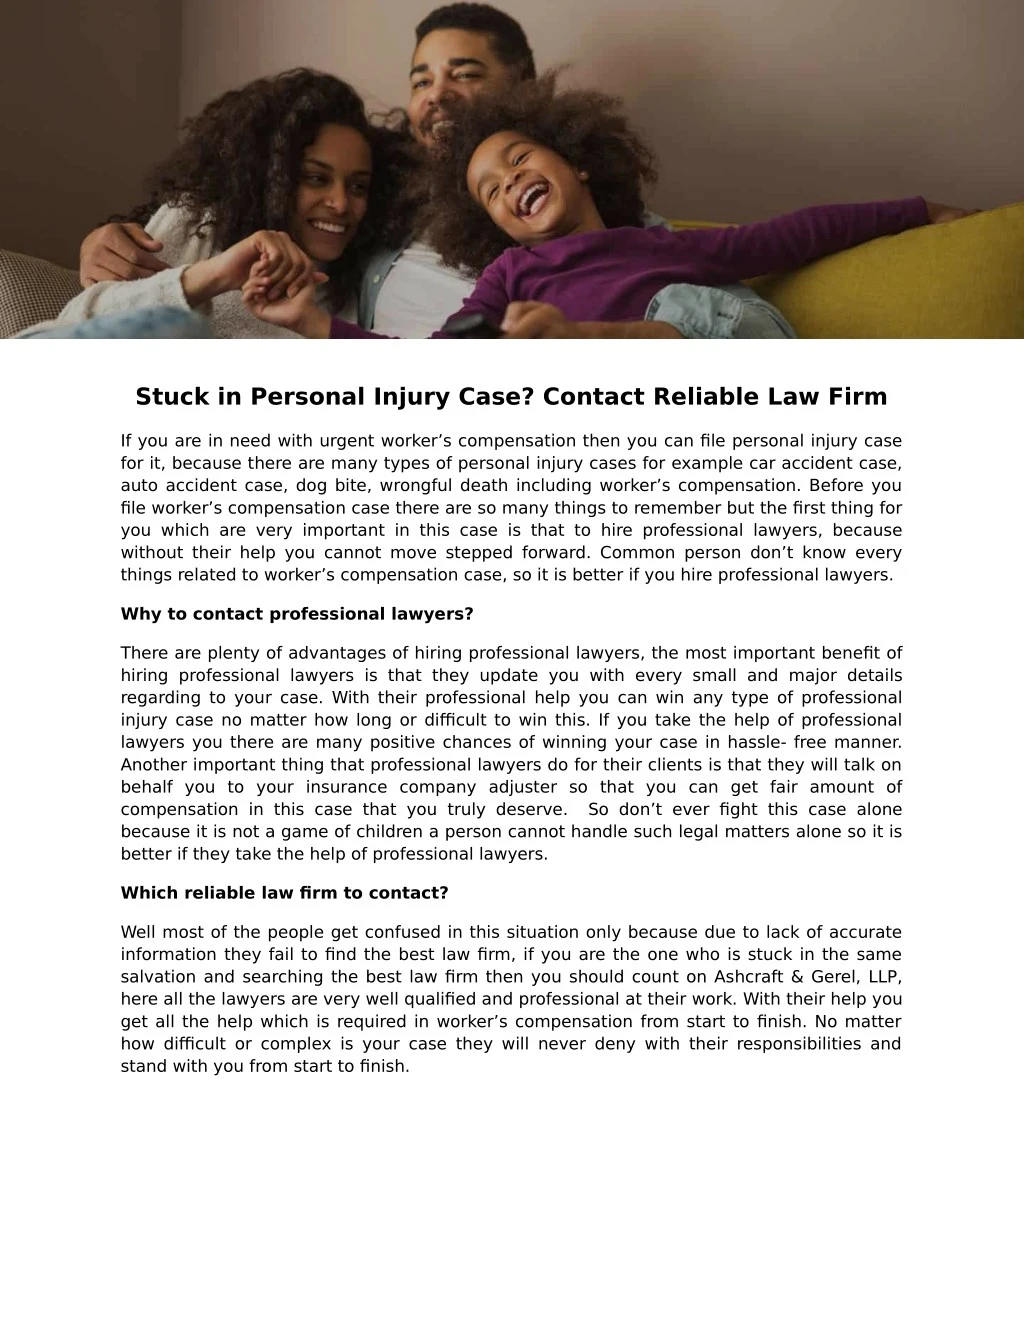 stuck in personal injury case contact reliable